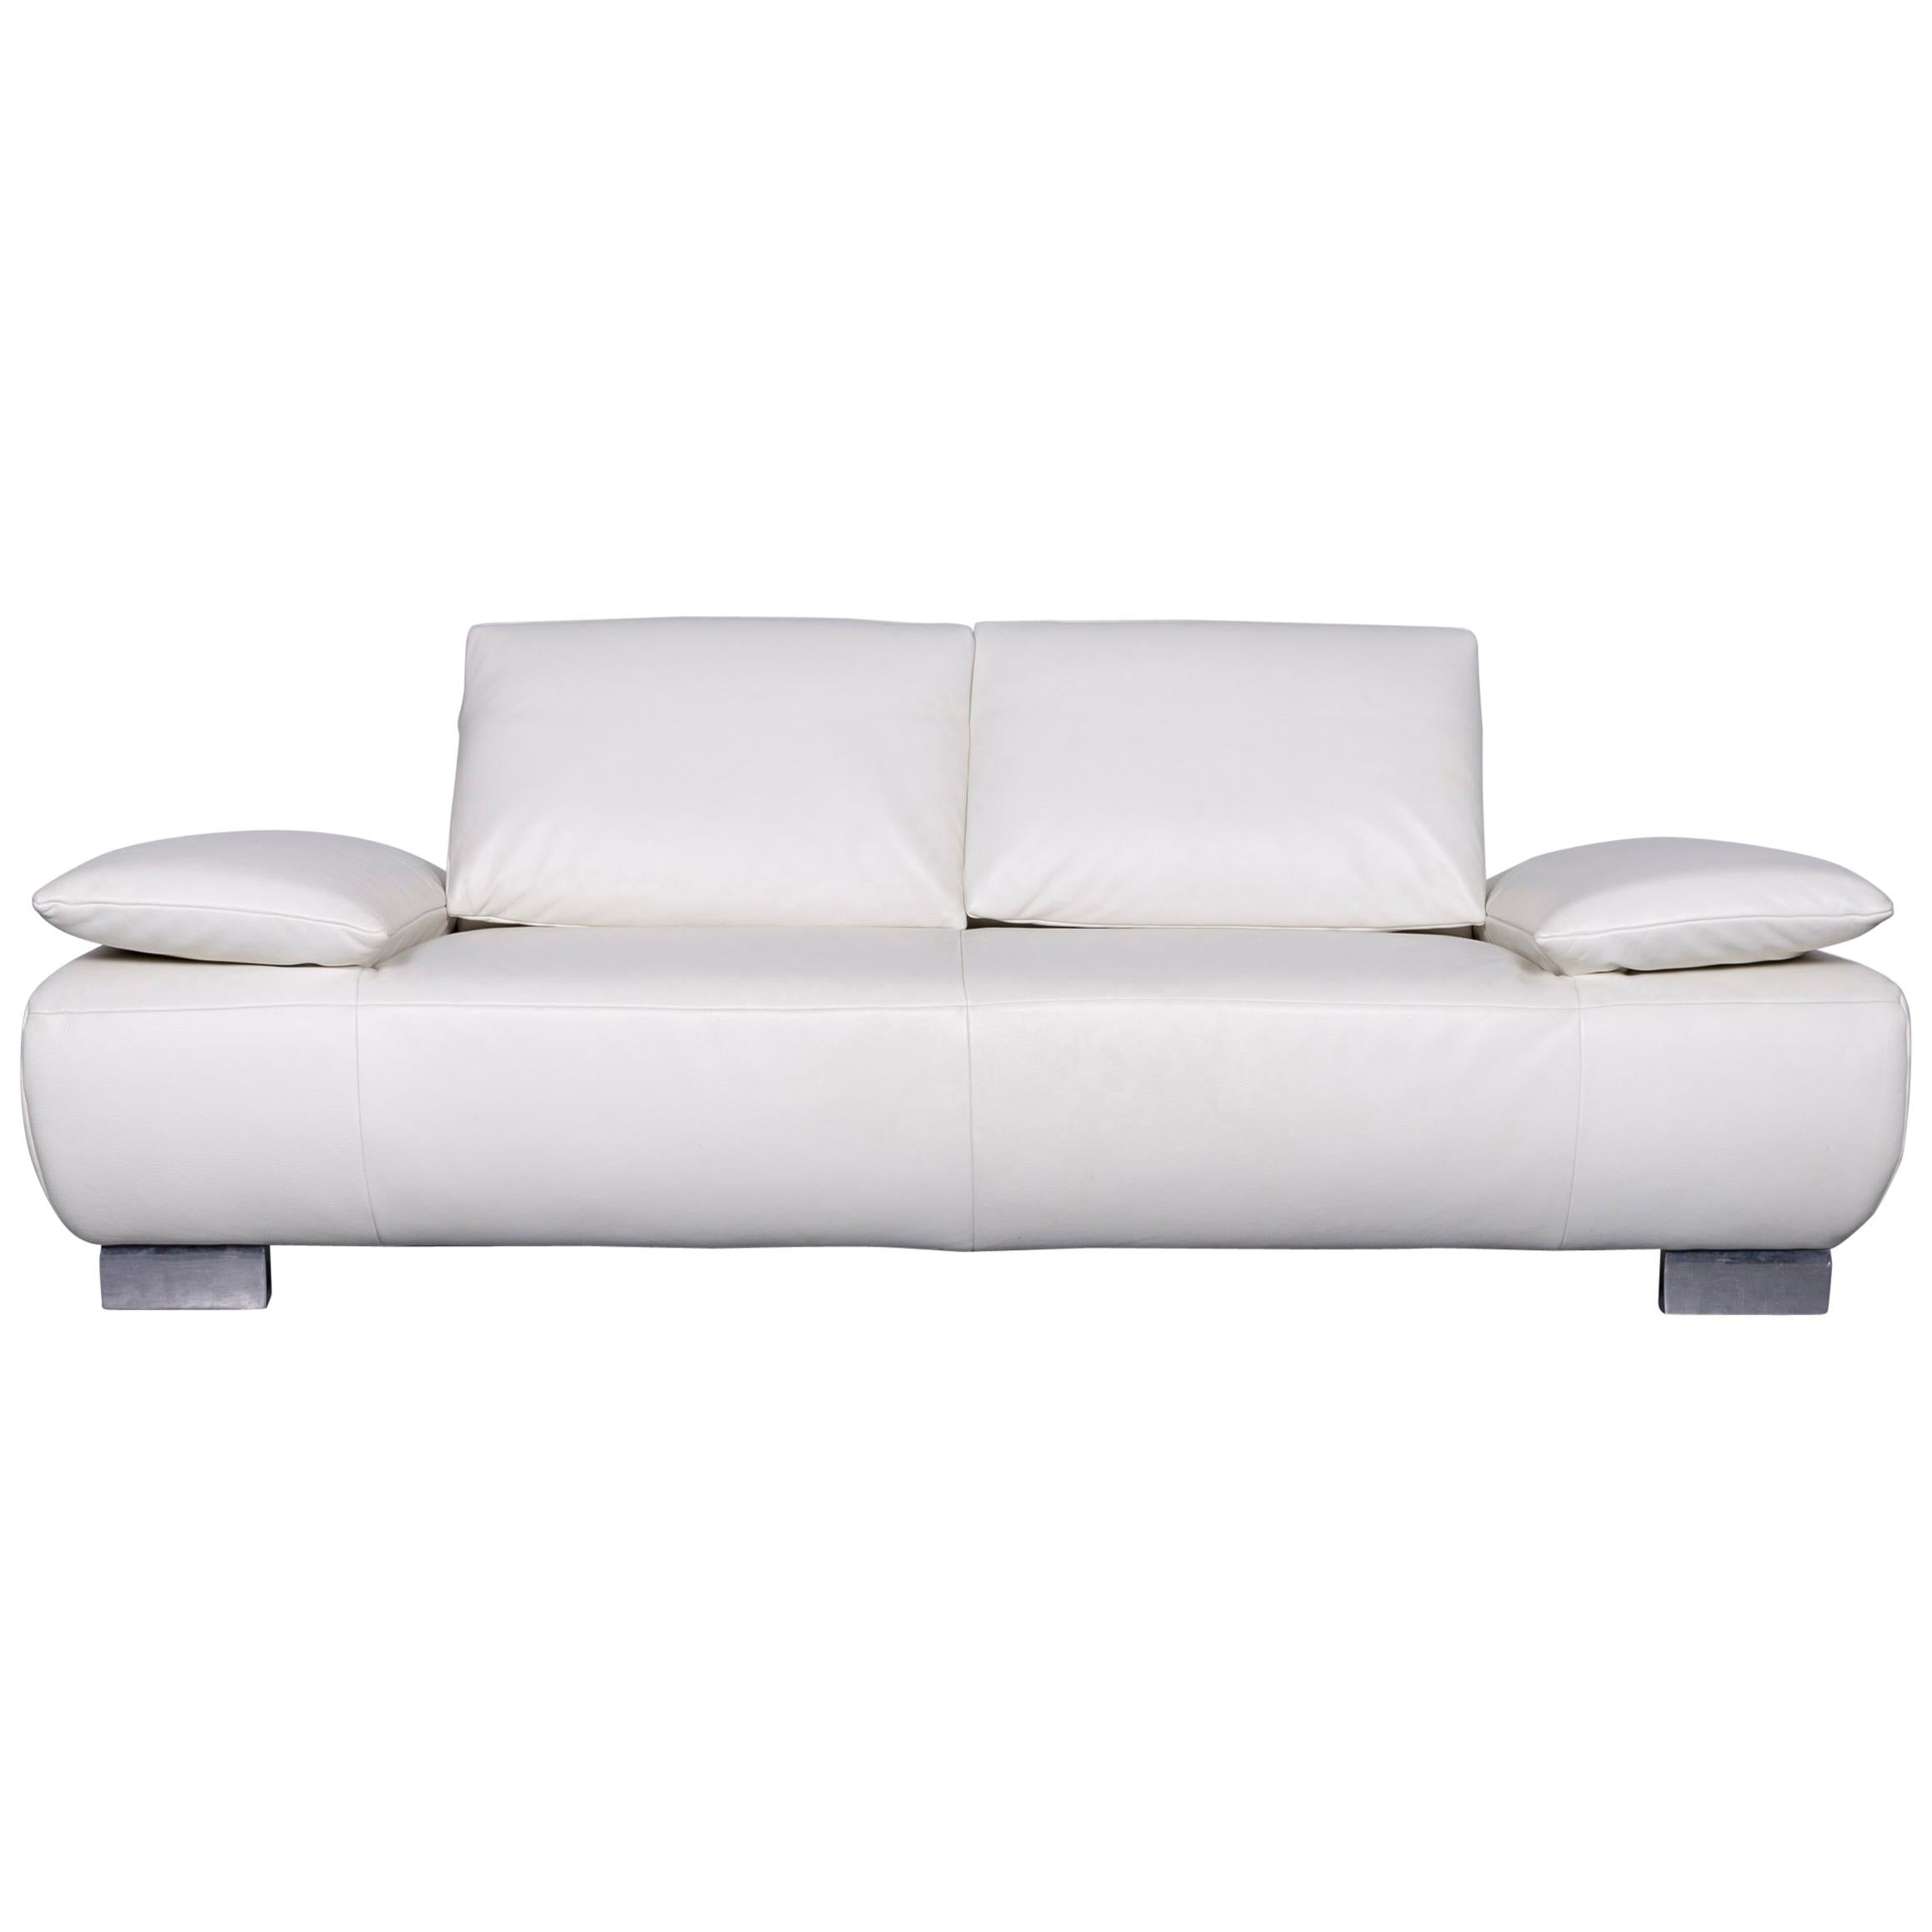 Koinor Volare Designer Sofa White Three-Seat Leather Couch with Function For Sale